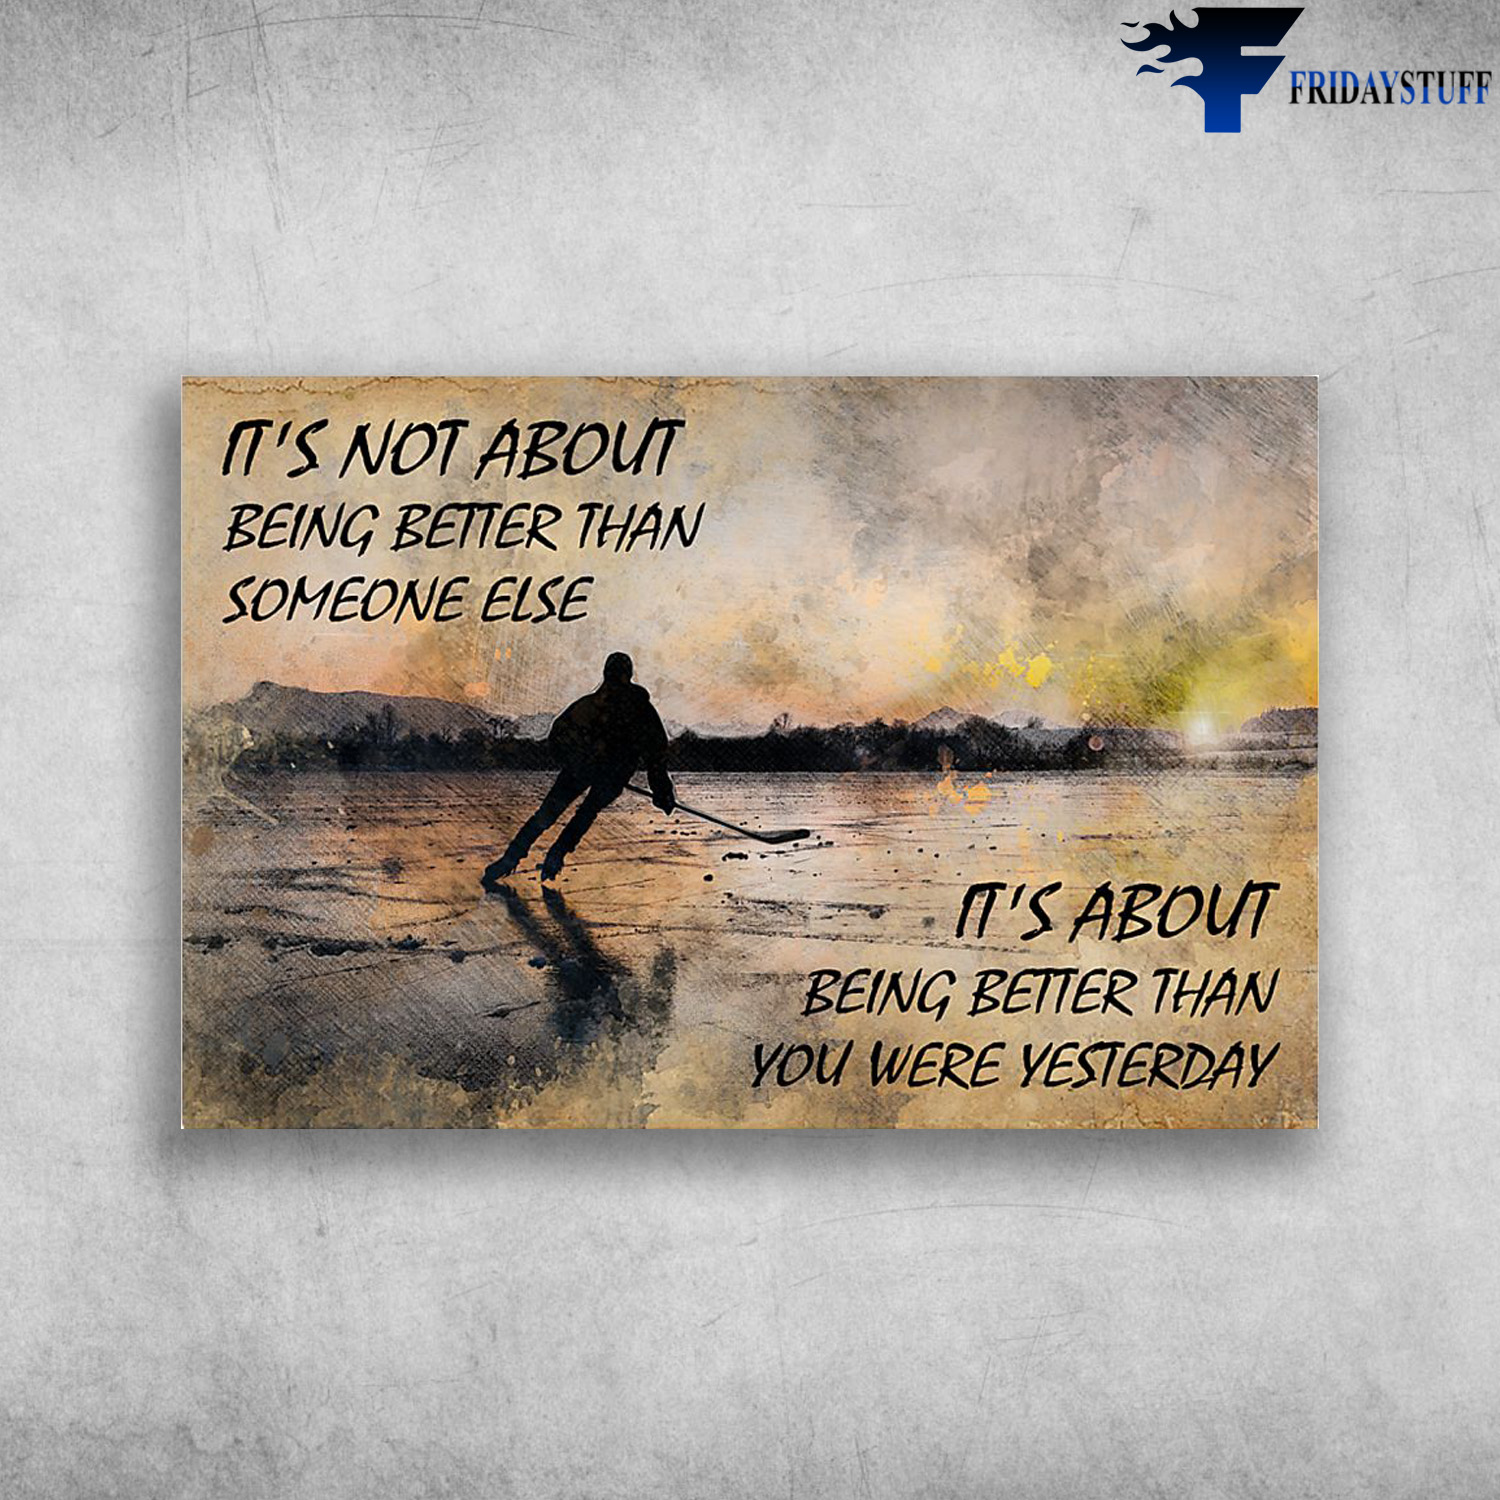 Hockey Man - It's Not About Better Than Someone Else, It's About Being Better Than You Were Yesterday